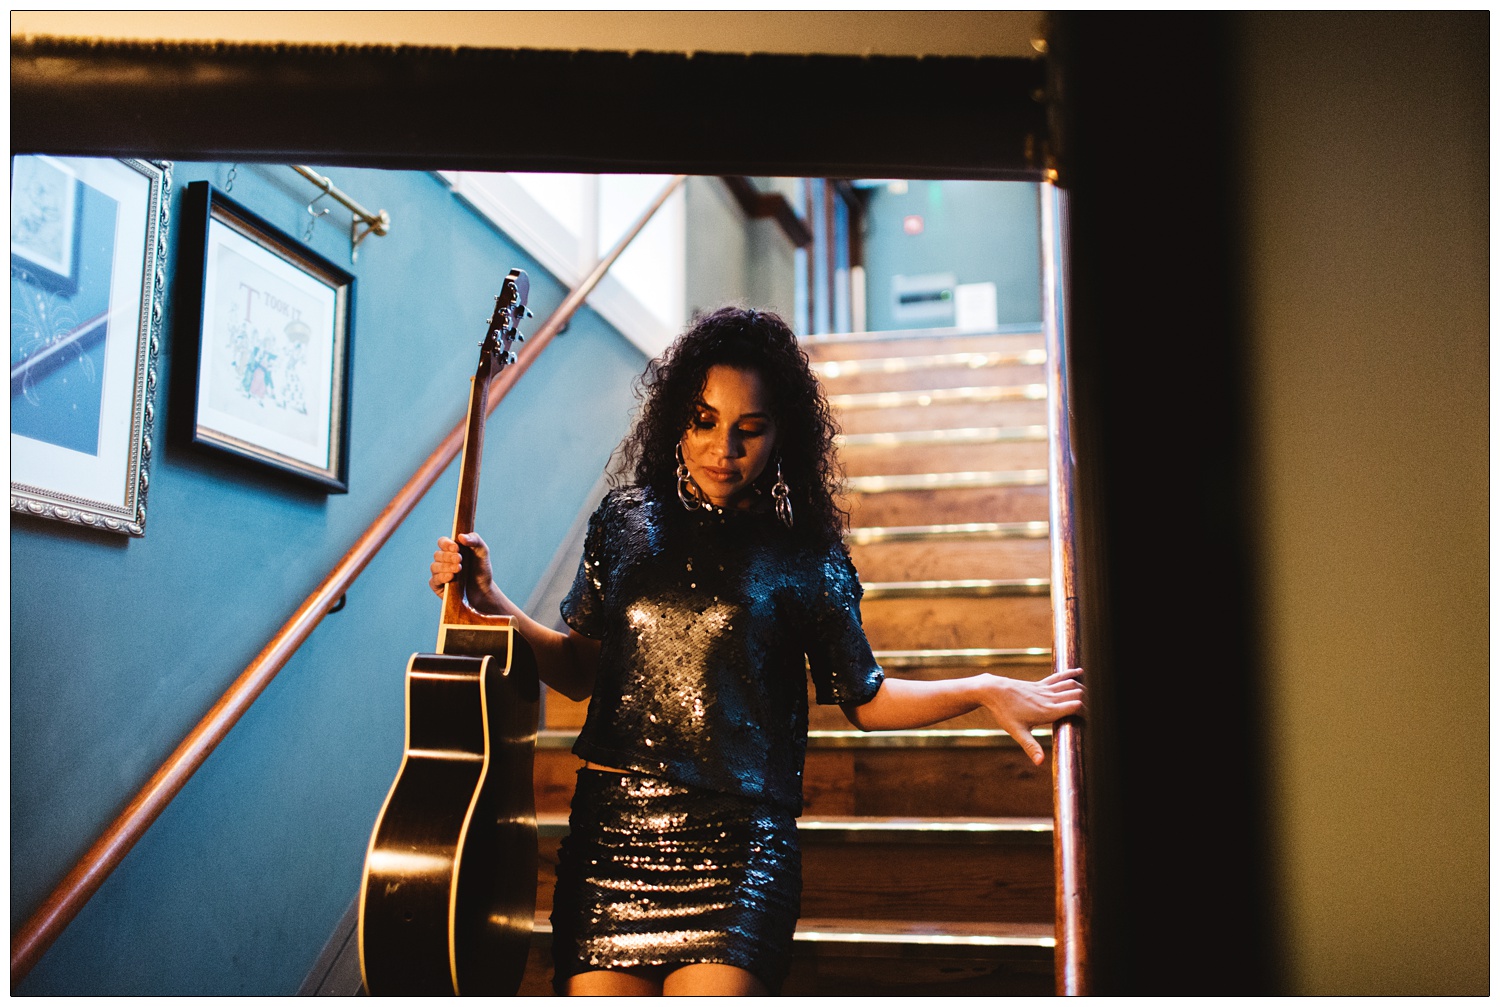 Singer Malaika coming down the stairs holding a guitar